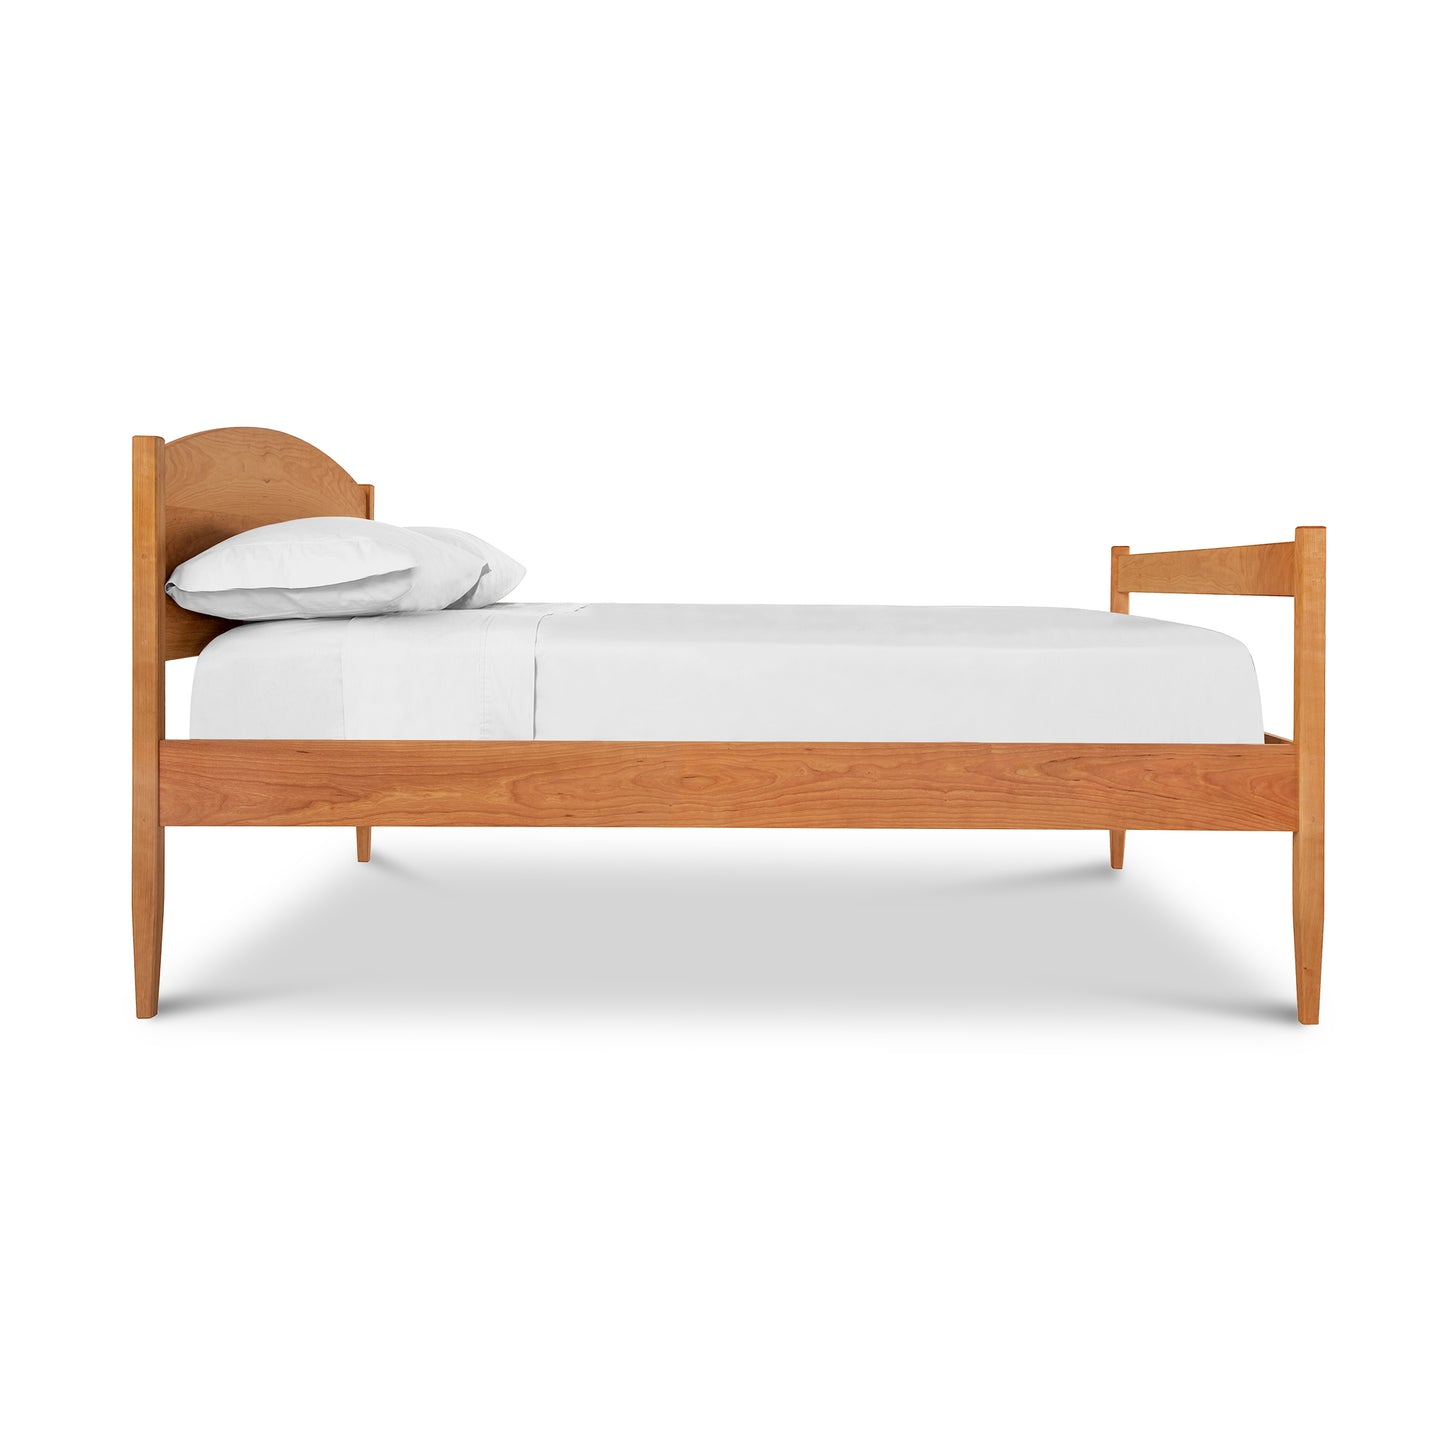 A simple Maple Corner Woodworks Vermont Shaker Bed frame with a curved headboard and a white mattress and pillow set against a plain white background.